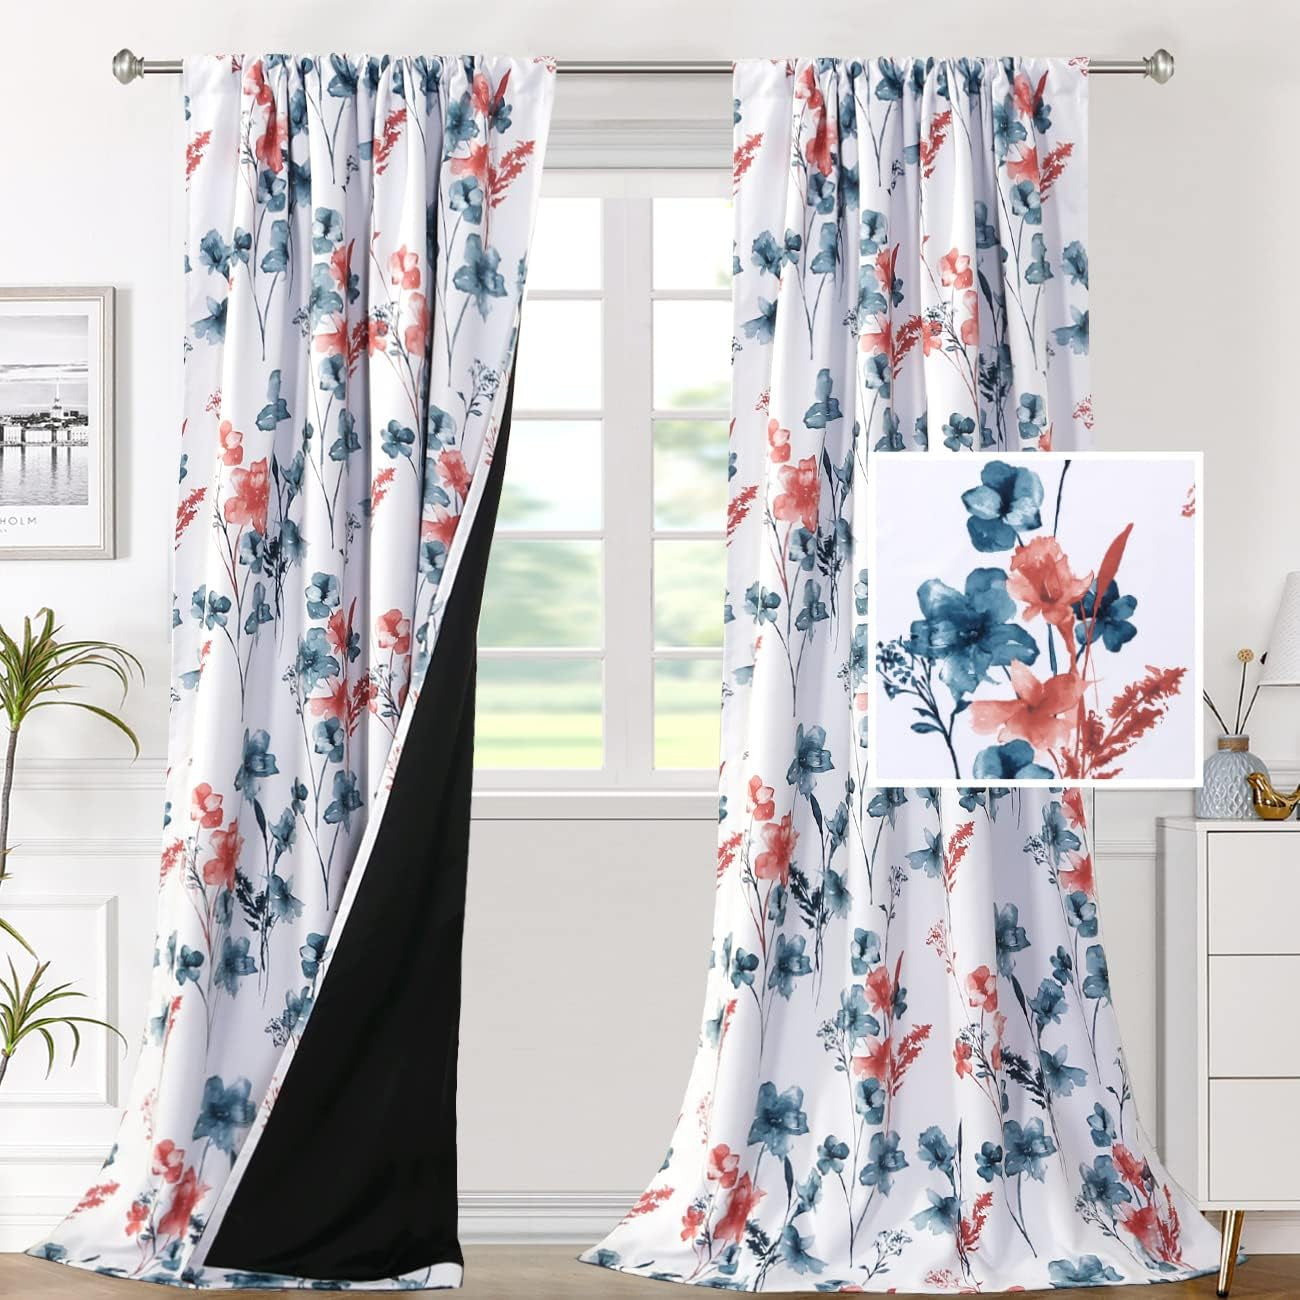 H.VERSAILTEX 100% Blackout Curtains for Bedroom Cattleya Floral Printed Drapes 84 Inches Long Leah Floral Pattern Full Light Blocking Drapes with Black Liner Rod Pocket 2 Panels, Navy/Taupe  H.VERSAILTEX Stone Blue/Coral 52"W X 96"L 